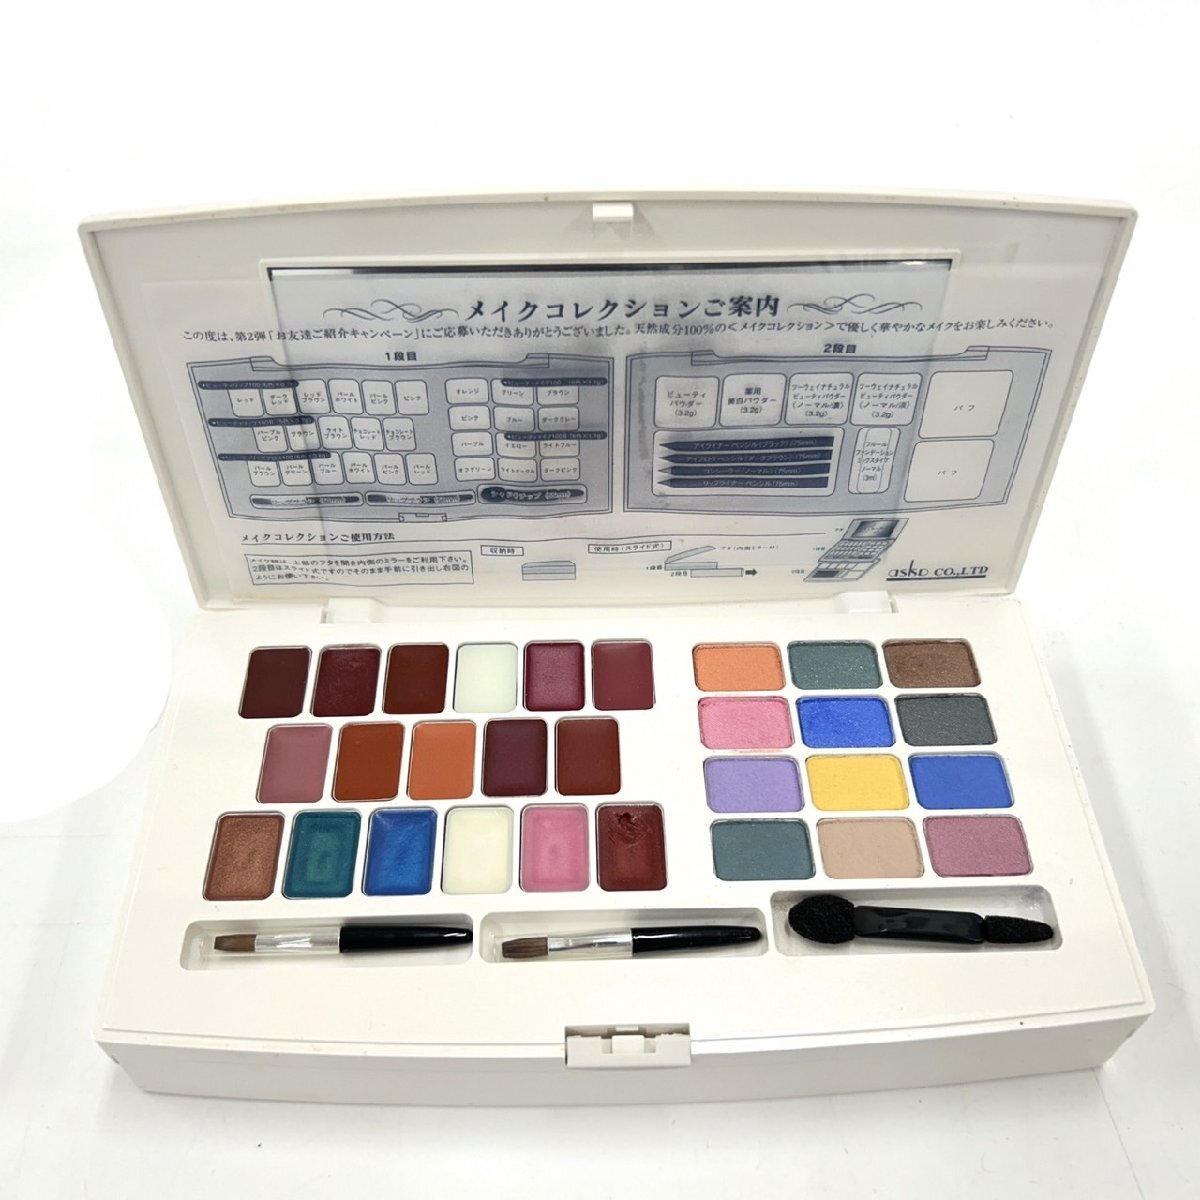 1 jpy start cosme summarize 14 point CHANEL Chanel Dior Dior etc. essential oil Palette make-up cosmetics lady's 